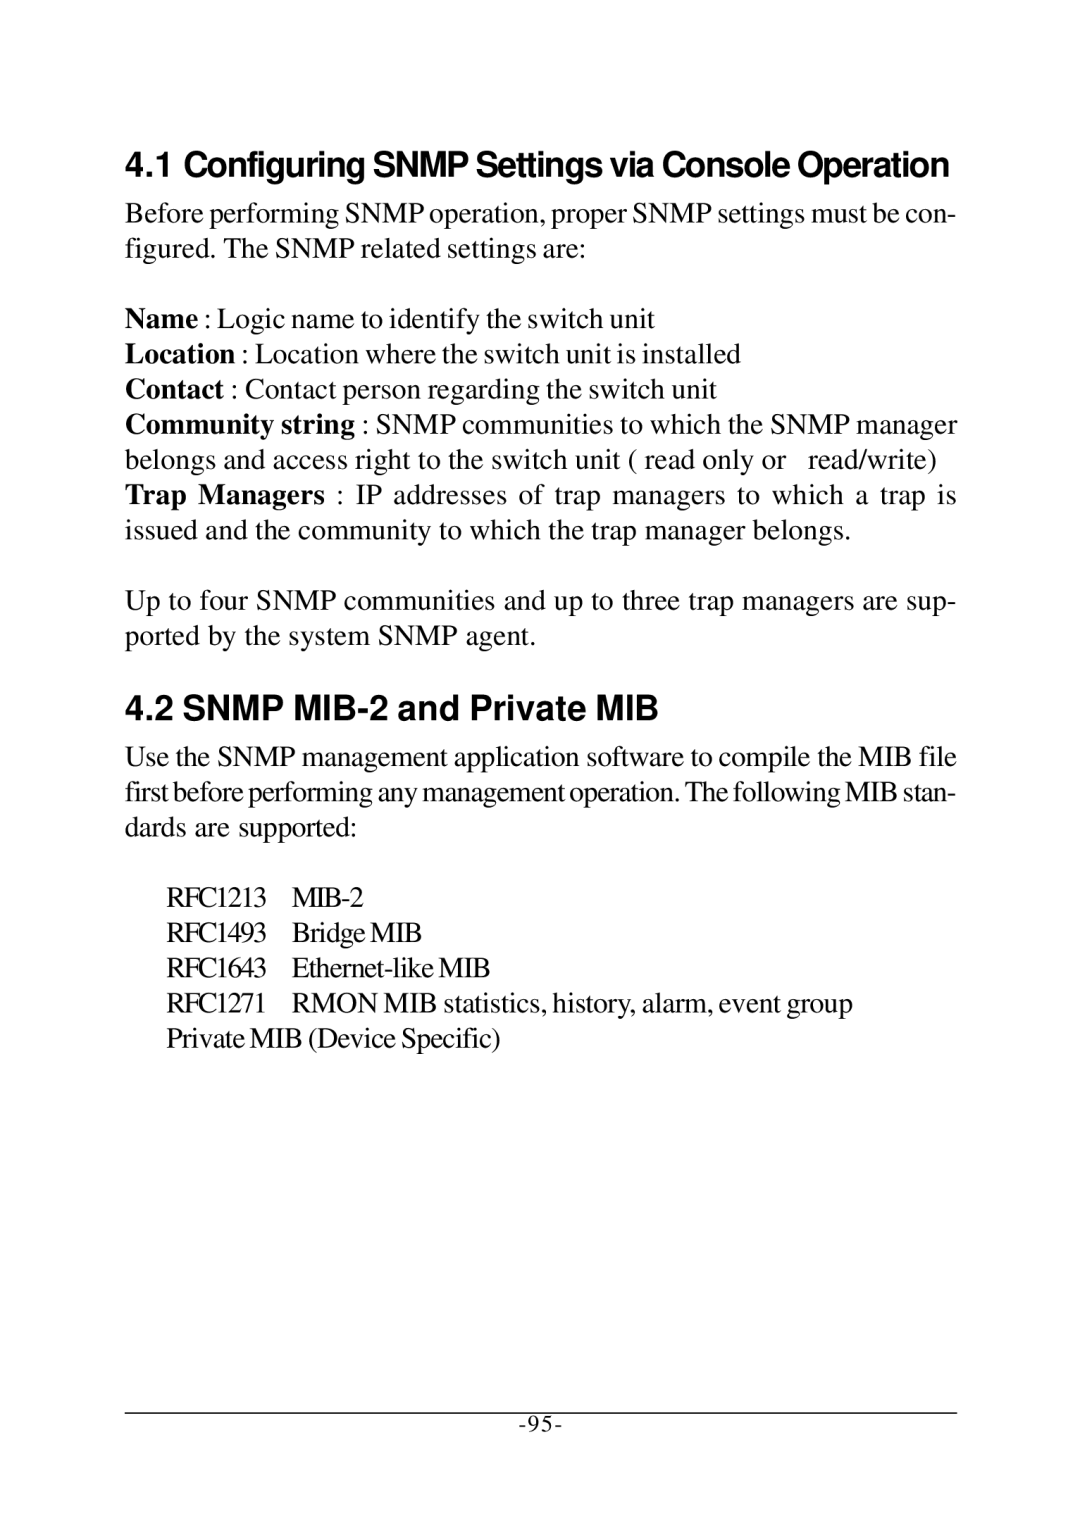 KTI Networks KS-2260 operation manual Configuring Snmp Settings via Console Operation, Snmp MIB-2 and Private MIB 